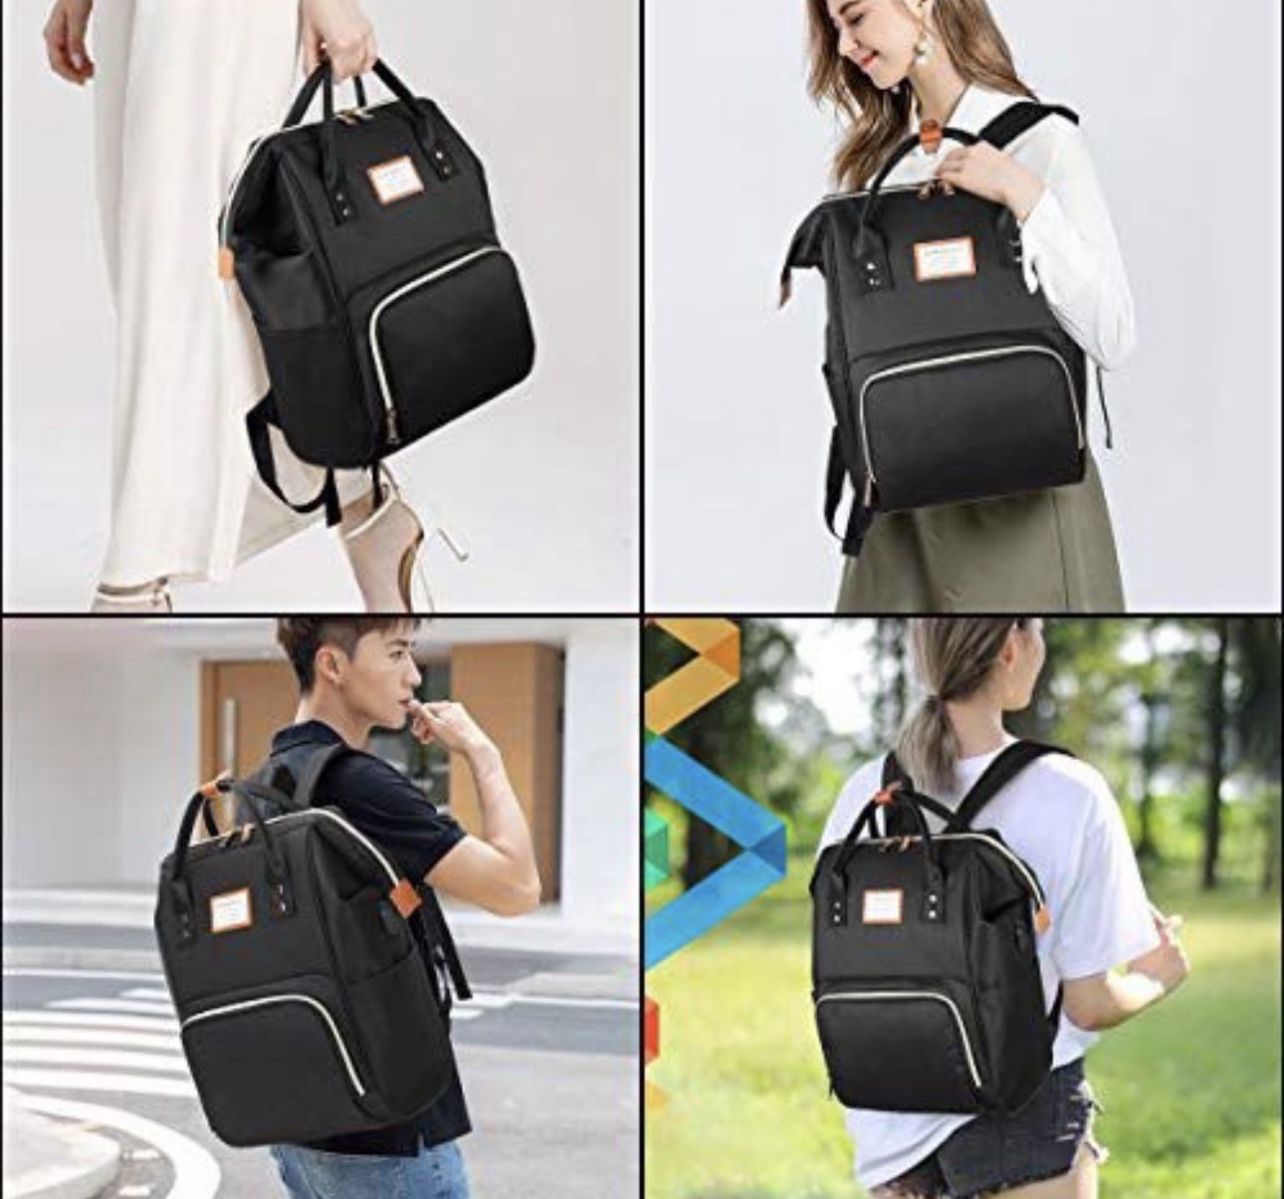 New Bag Or Laptop Backpack 15 Inch Casual Daypack Water Resistant 